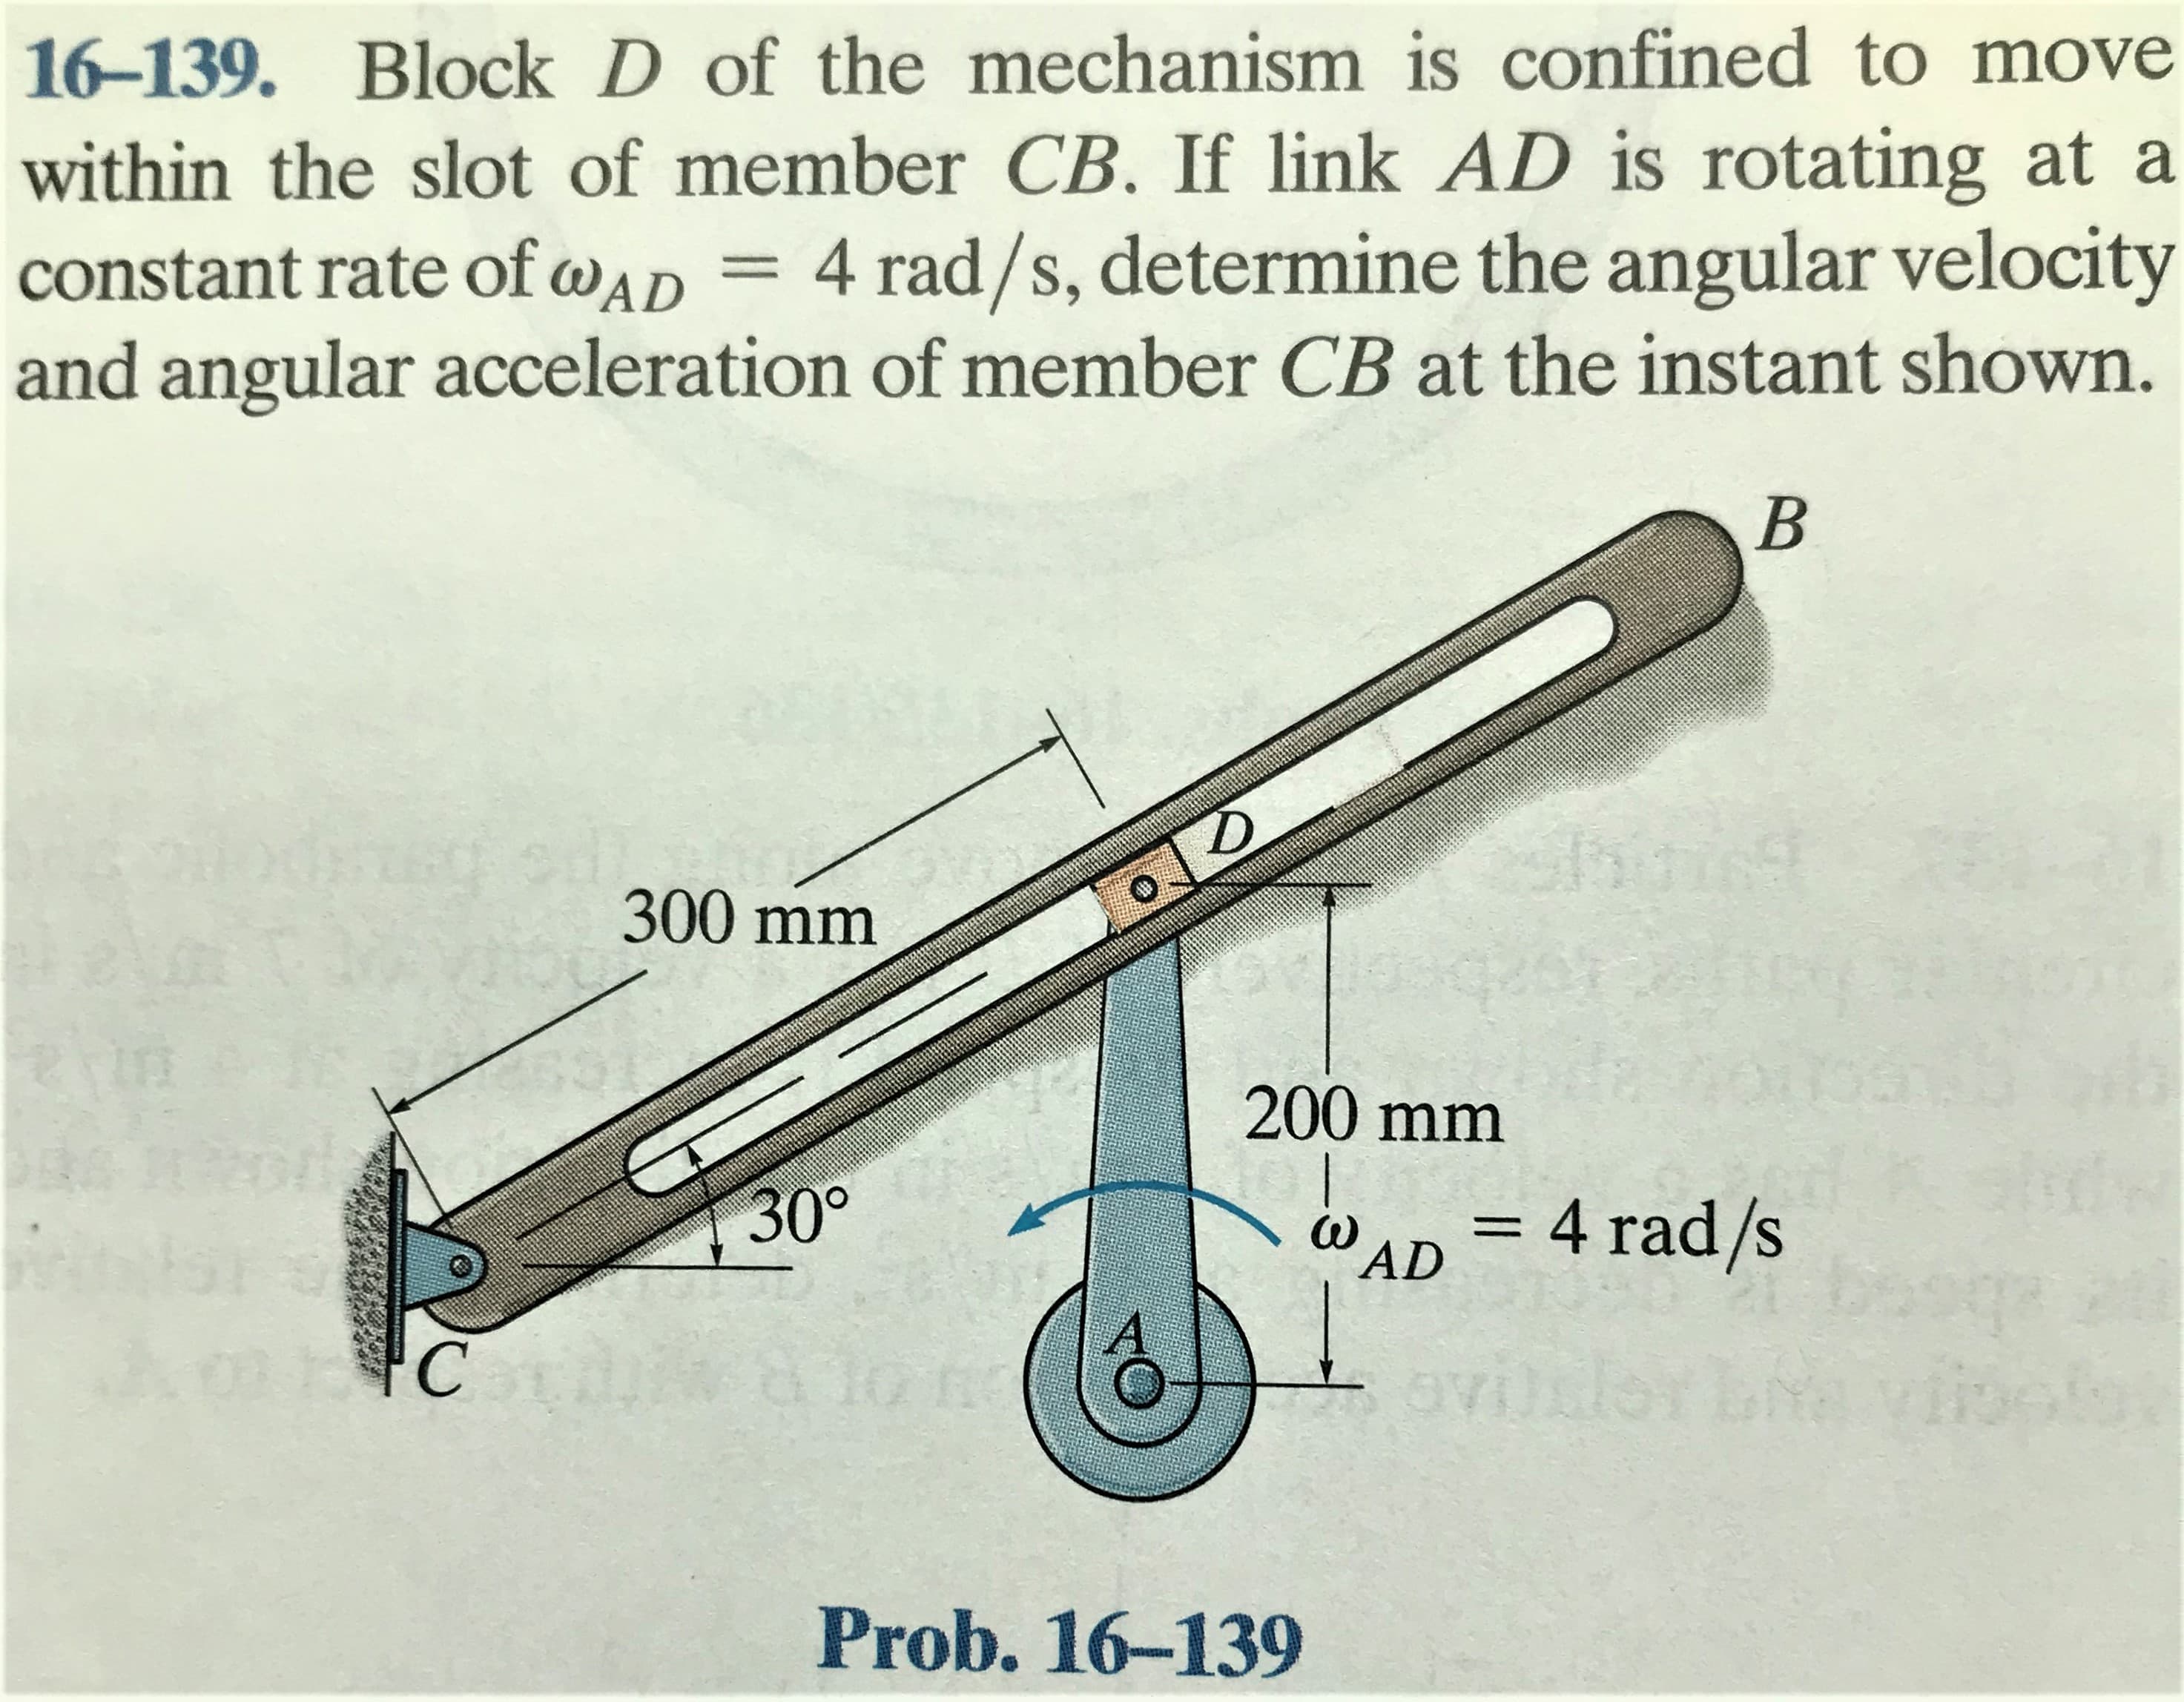 16-139. Block D of the mechanism is confined to move
within the slot of member CB. If link AD is rotating at a
4 rad/s, determine the angular velocity
and angular acceleration of member CB at the instant shown.
constant rate of wAD
300 mm
200 mm
30°
%3D
AD
= 4 rad/s
ovijrh
Prob. 16-139
